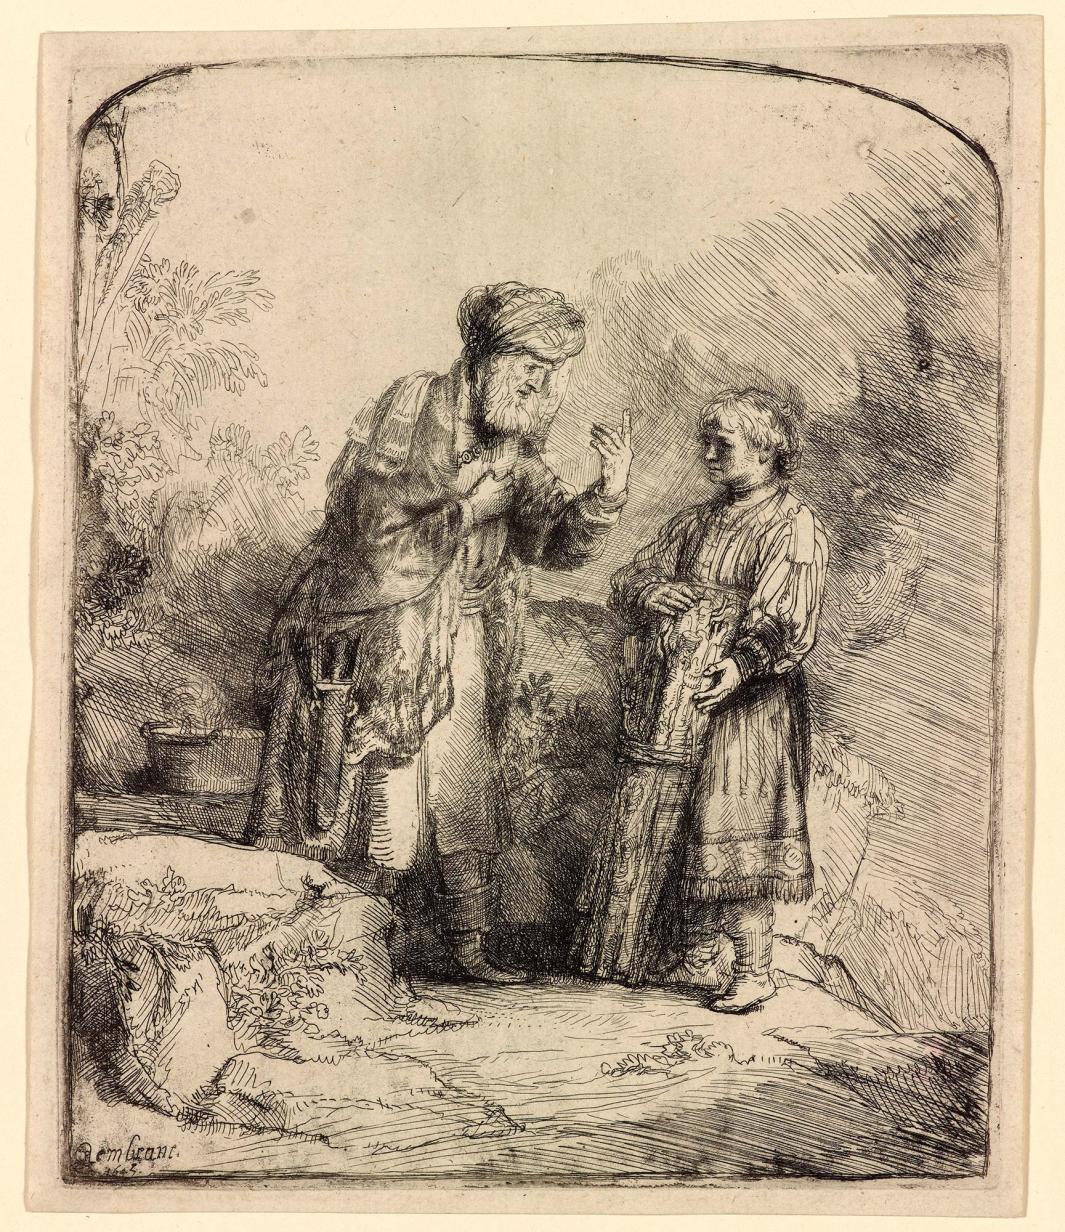 Rembrandt etching depicting biblical scene where Abraham is speaking to Isaac